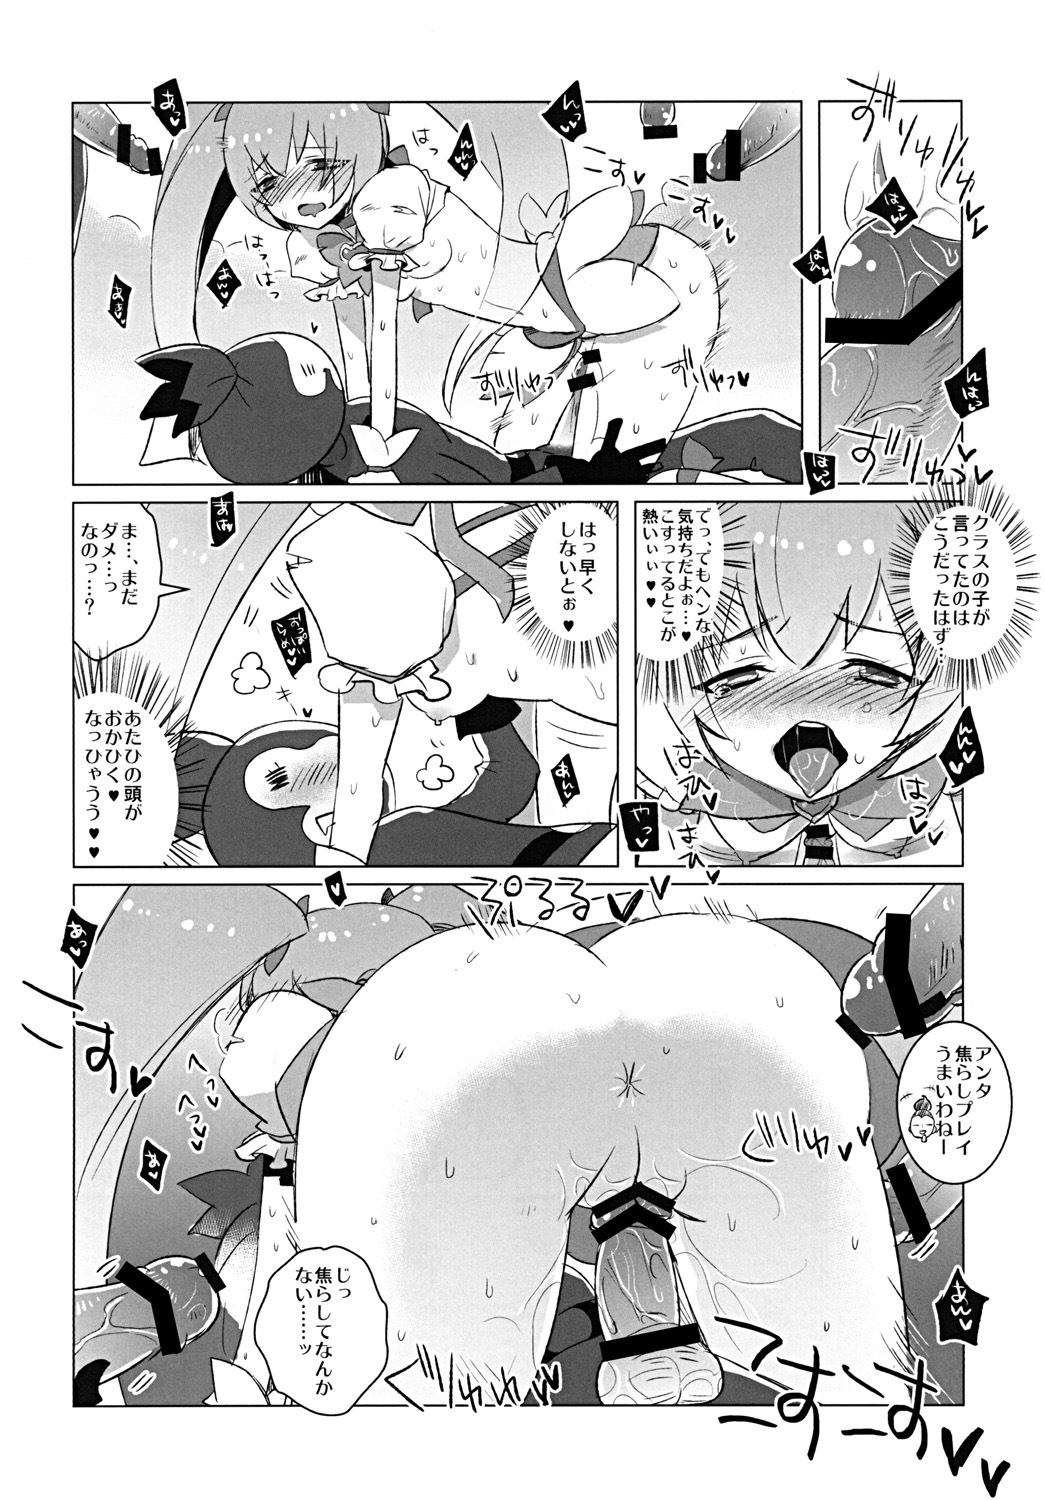 [clear glass (menimo)] Kite Mite Sawatte ☆ (Heart Catch Precure!) page 11 full